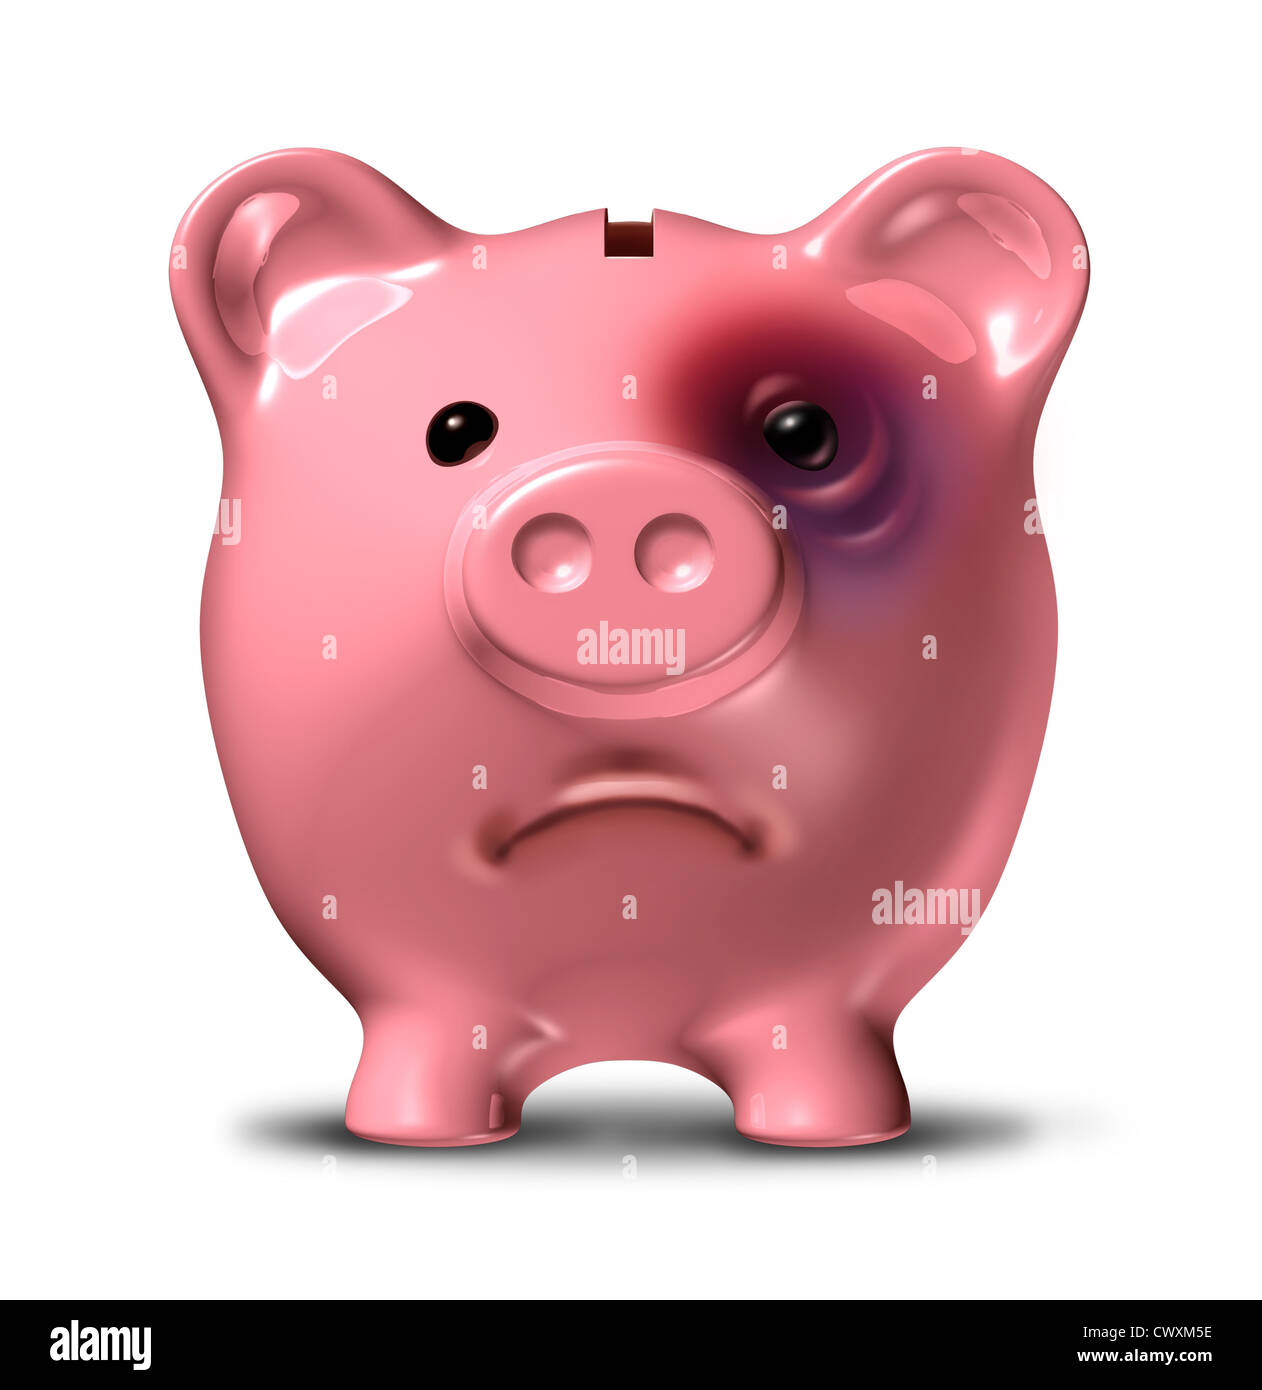 Financial stress and debt crisis as a bad investment business concept with a pink piggy bank with a painful black eye as an icon of broken home finances and budget problems due to the economic recession. Stock Photo